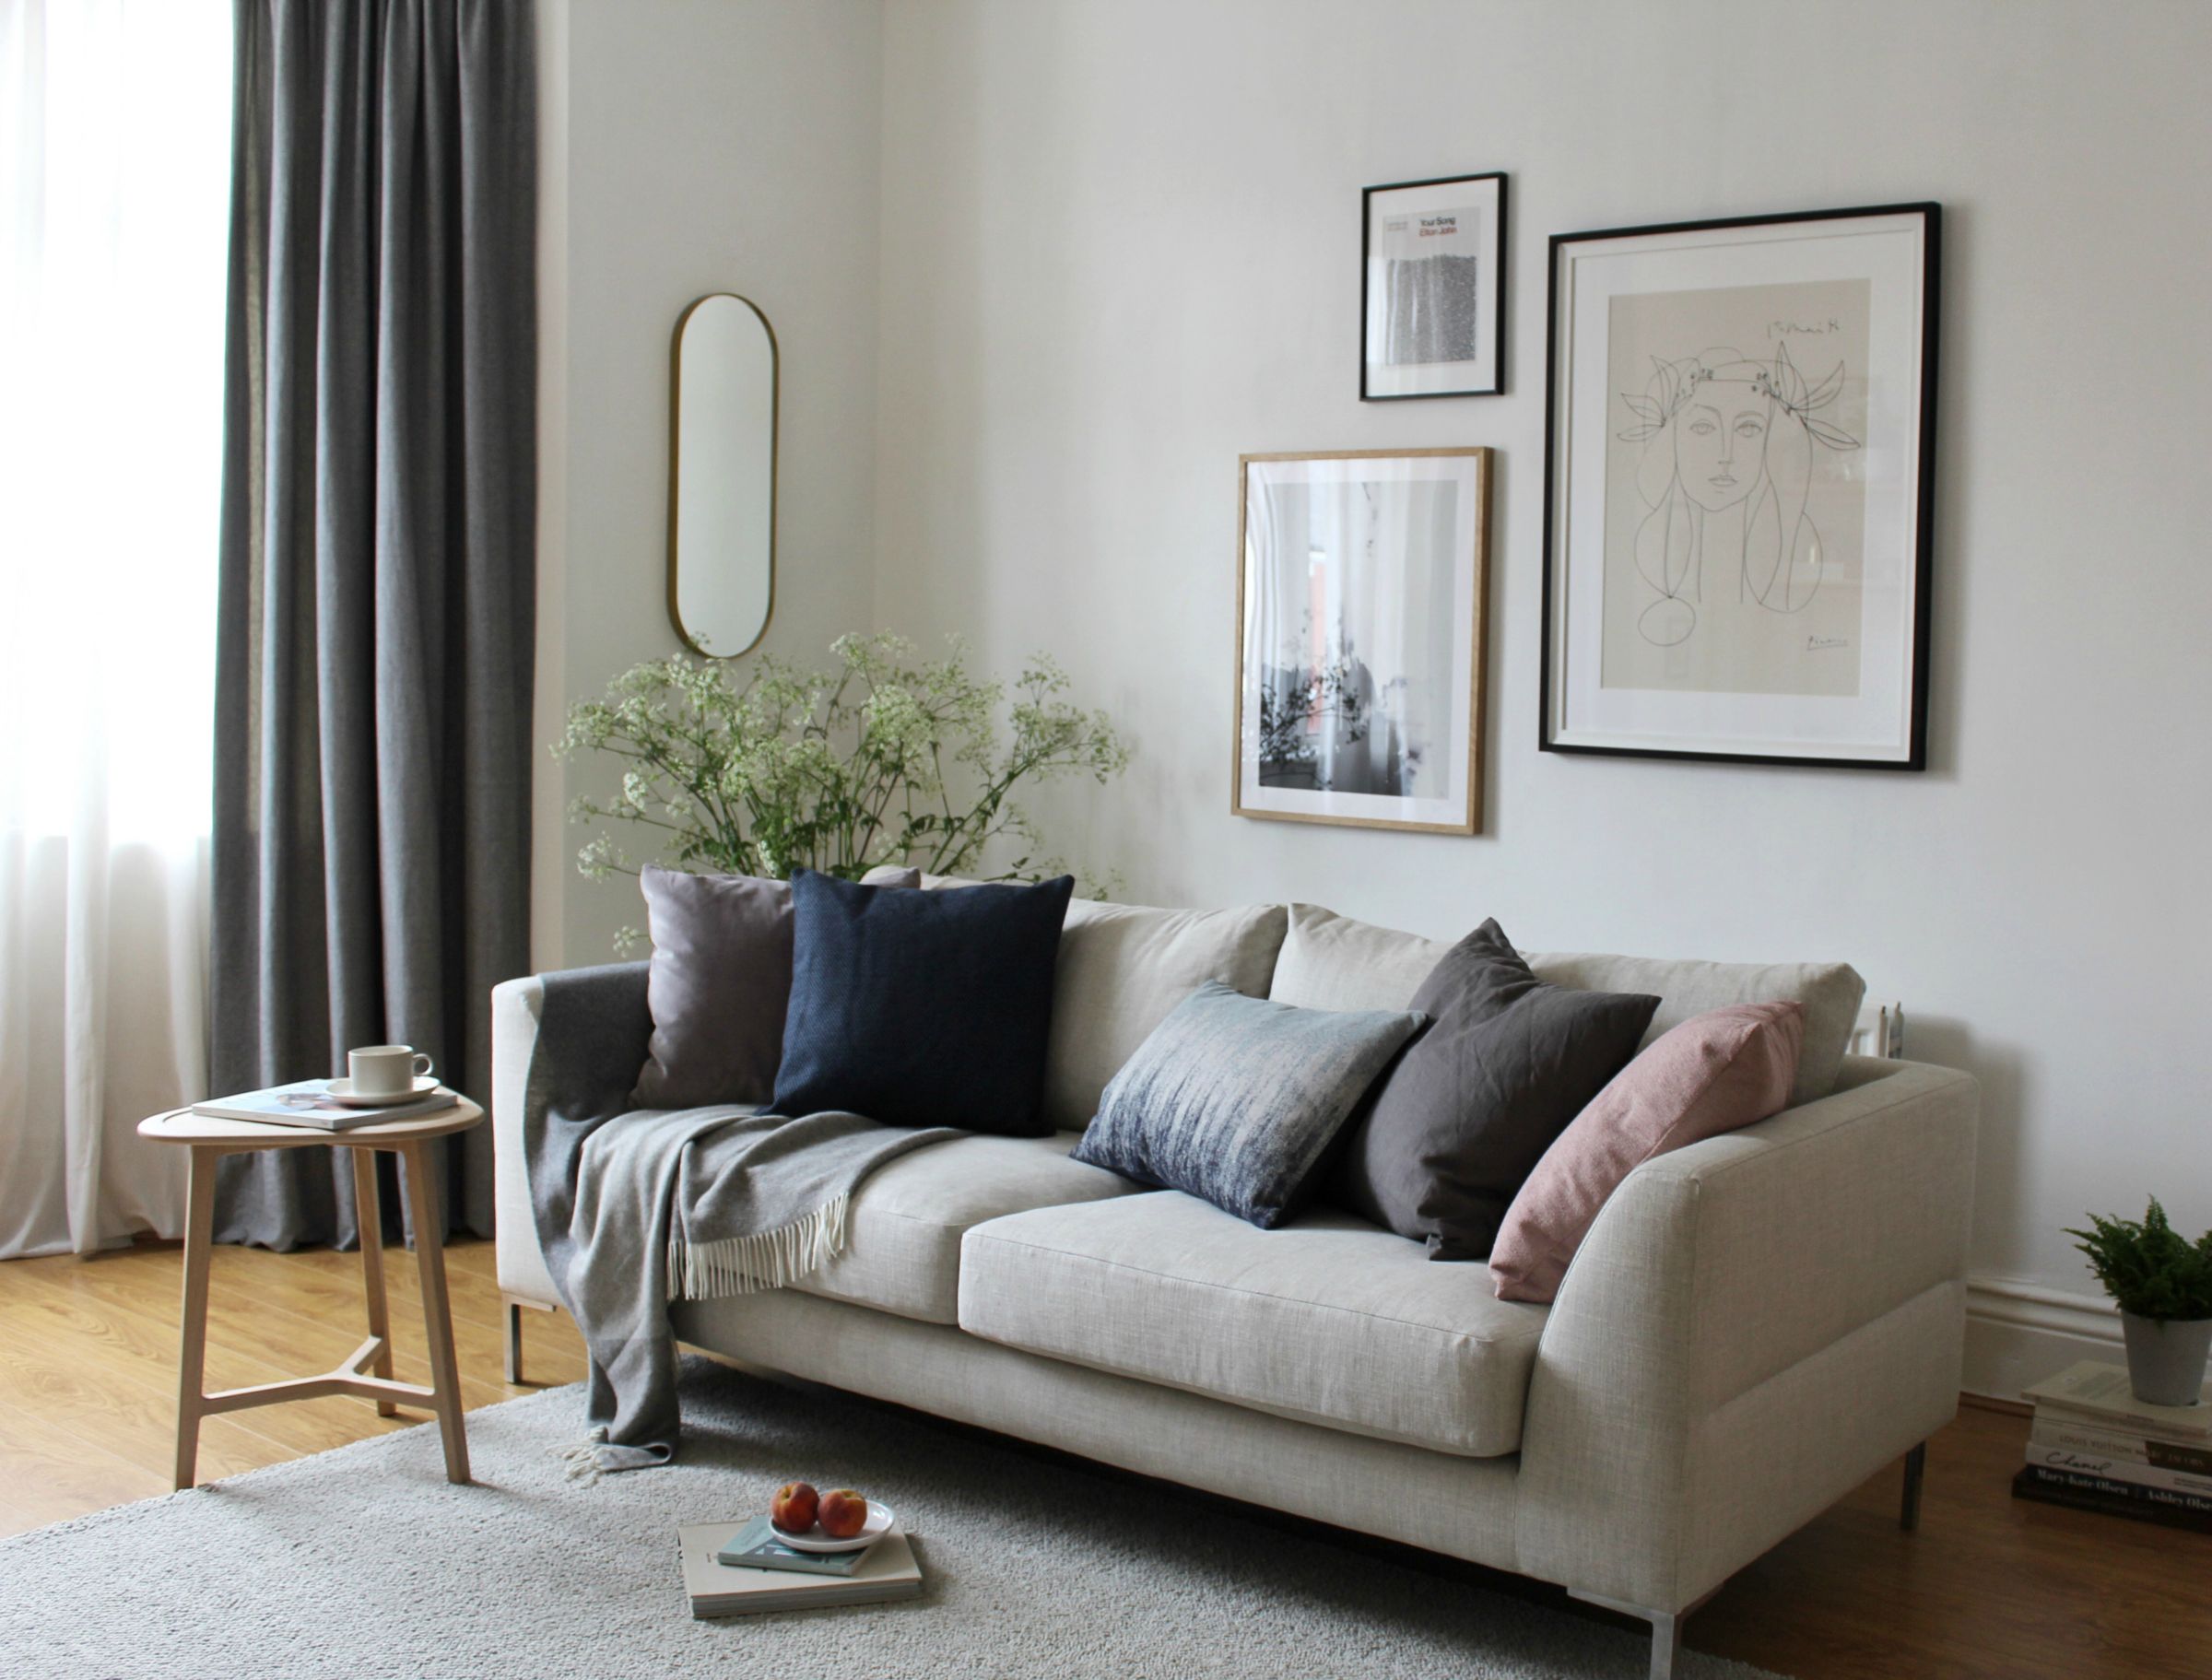 How interiors insiders really style their own living spaces